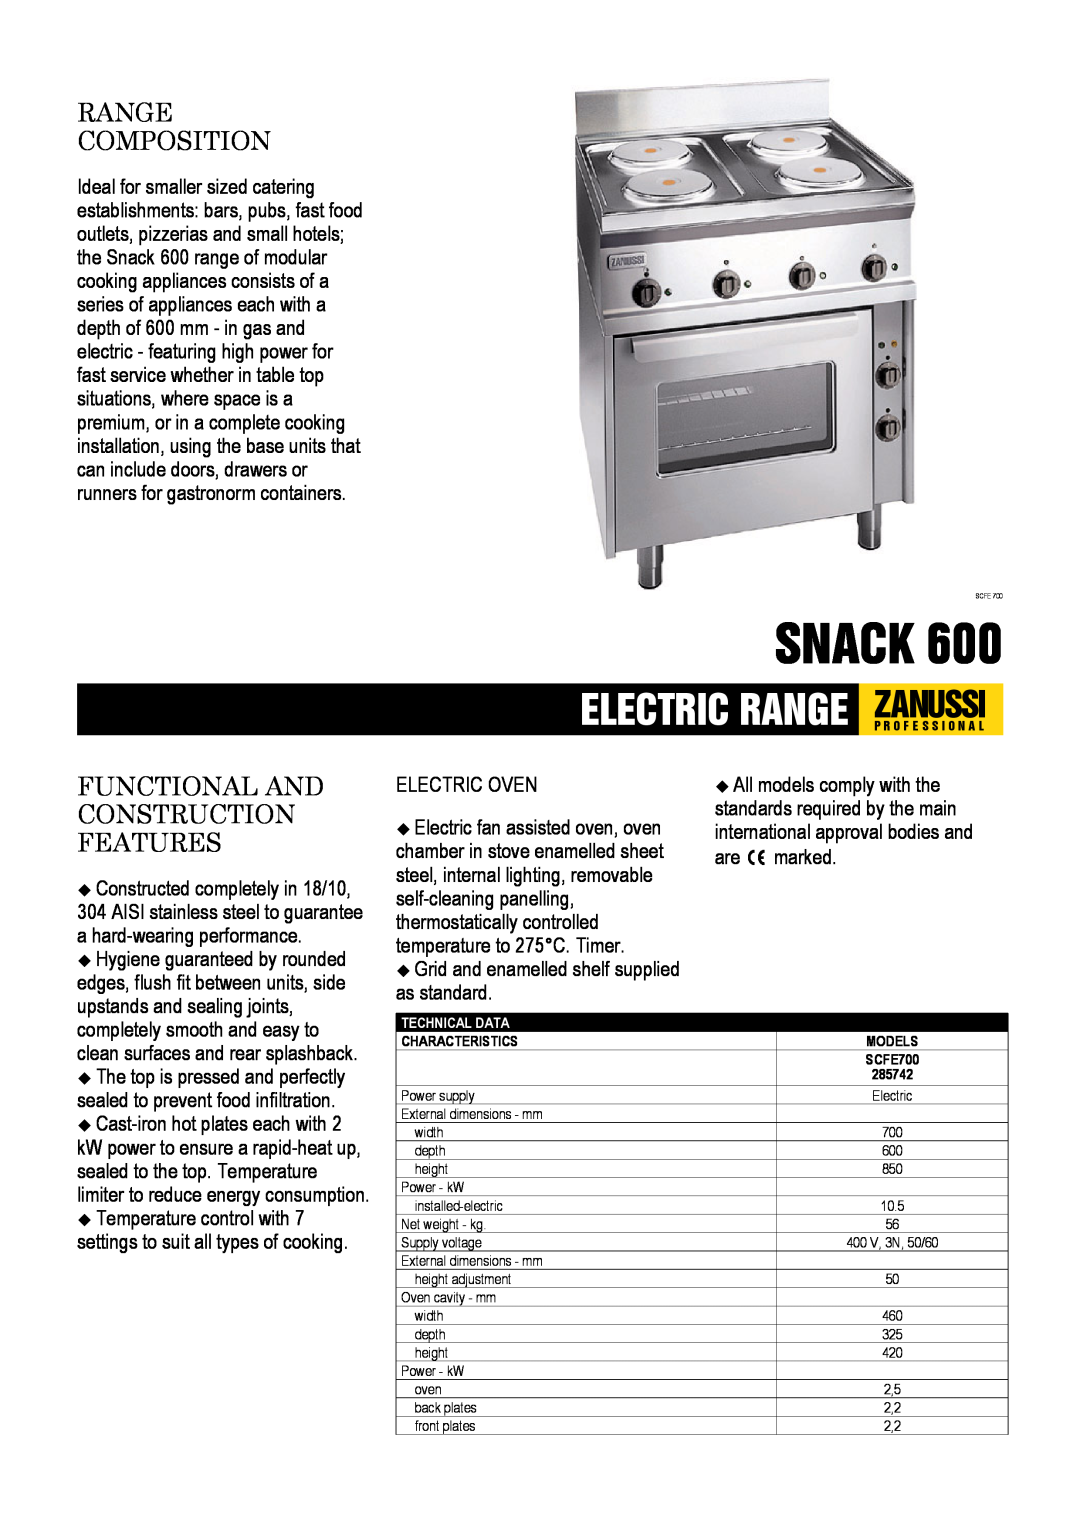 Zanussi 285742, SCFE700 dimensions Snack, Range Composition, Functional And Construction Features 